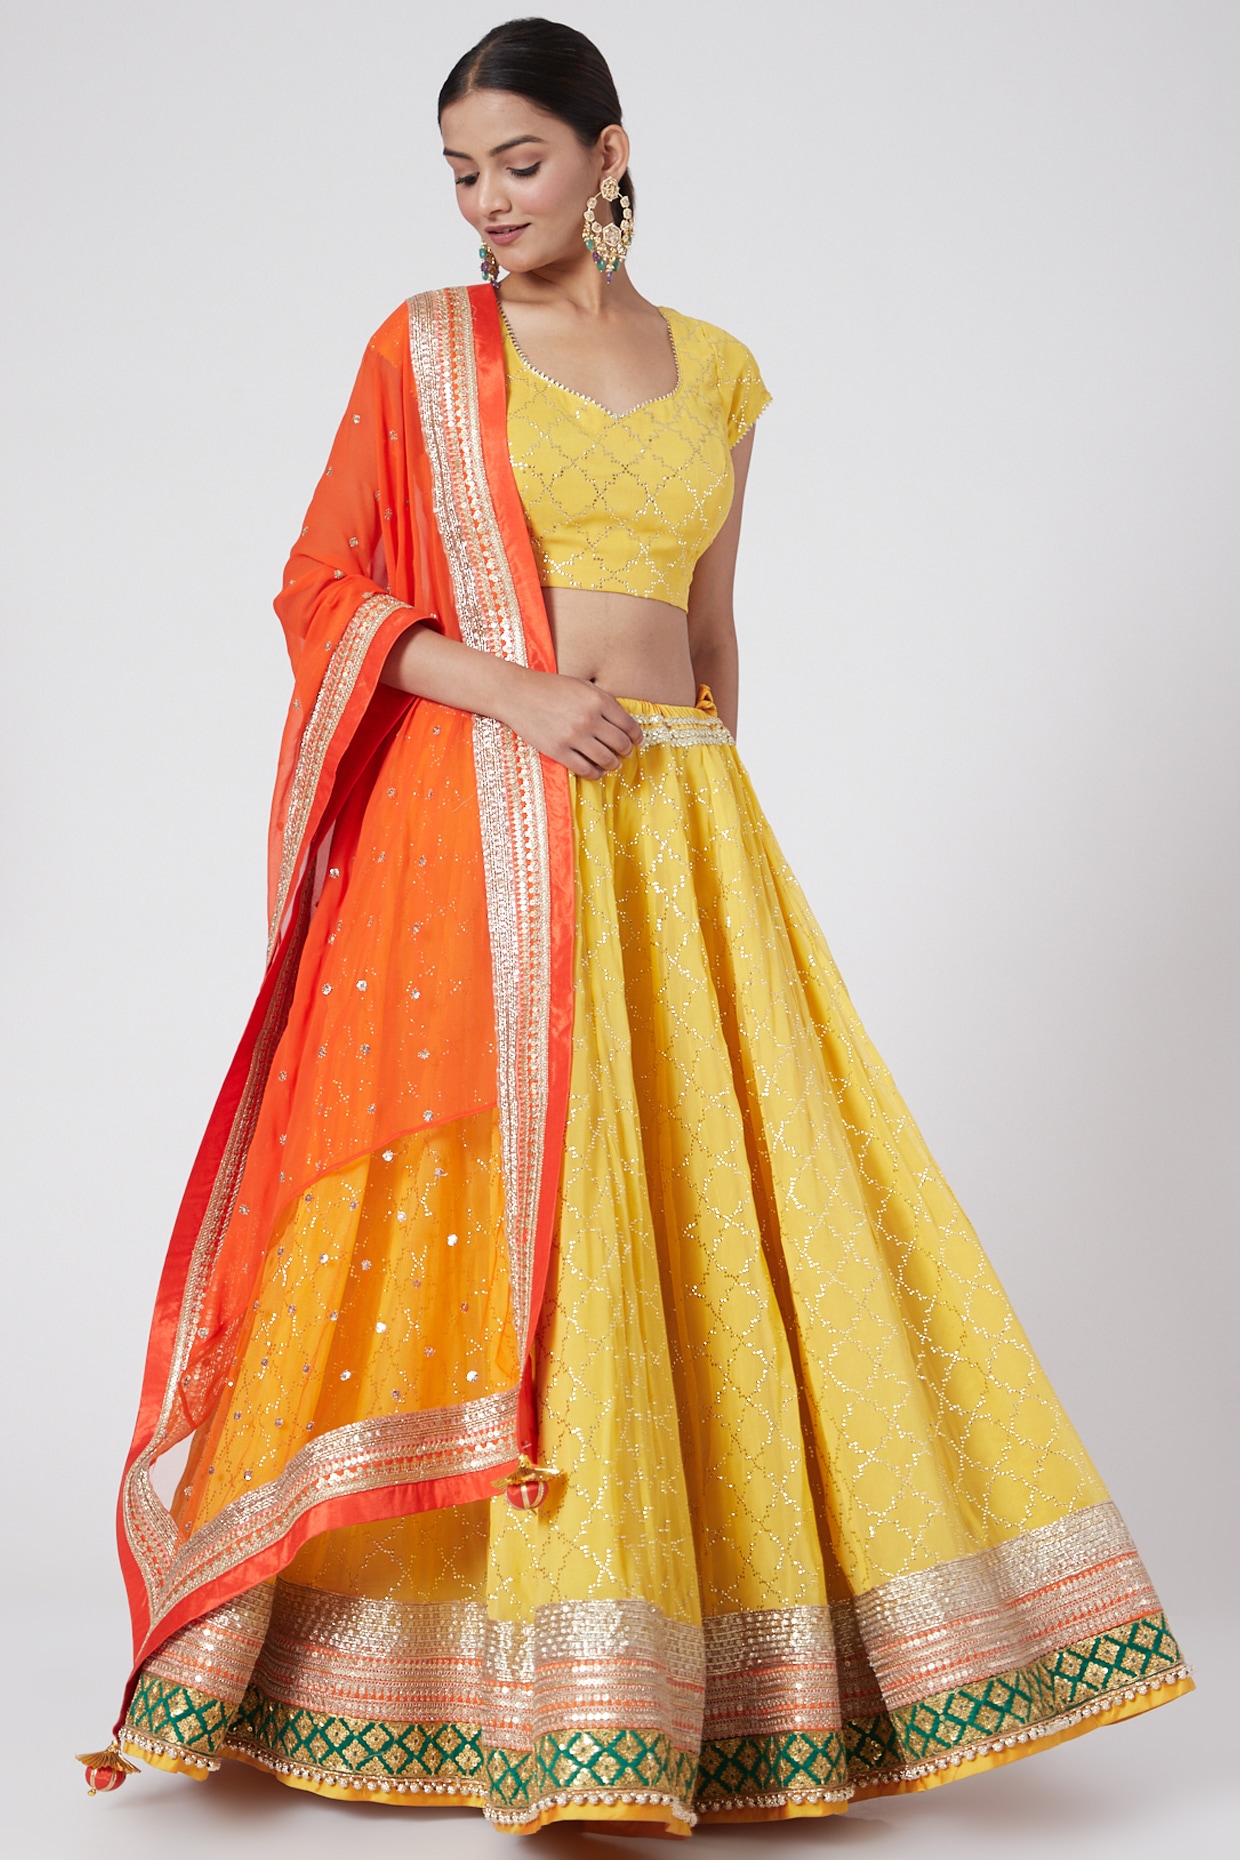 Orange Brocade Lehenga With A Chiffon Dupatta And Hand Embroidered Sil –  Saris and Things